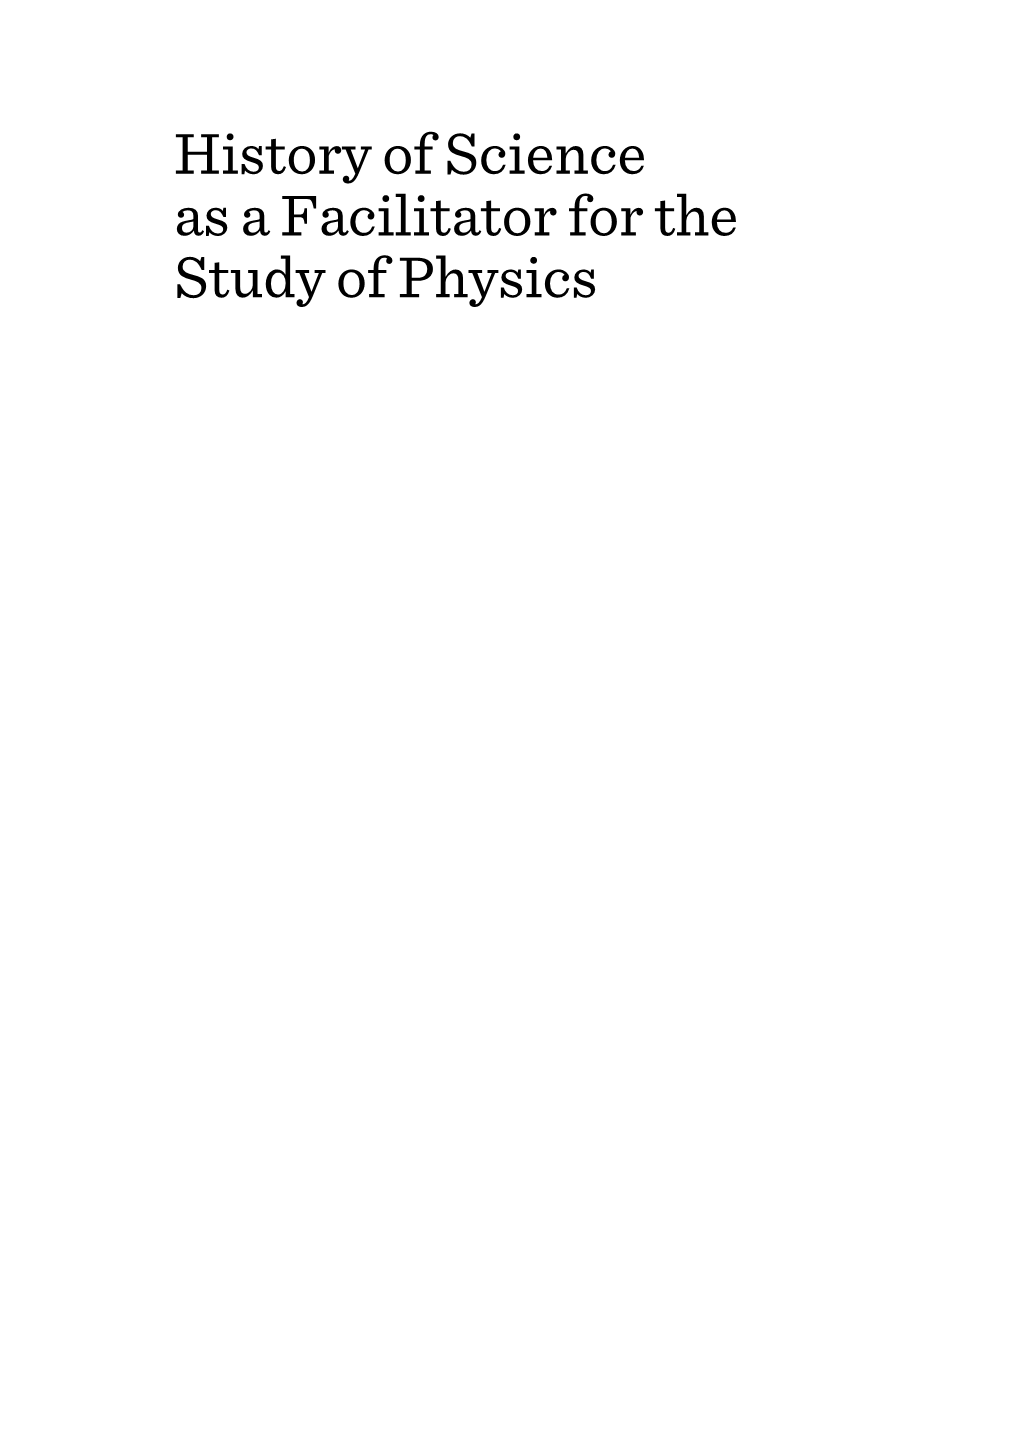 History of Science As a Facilitator for the Study of Physics